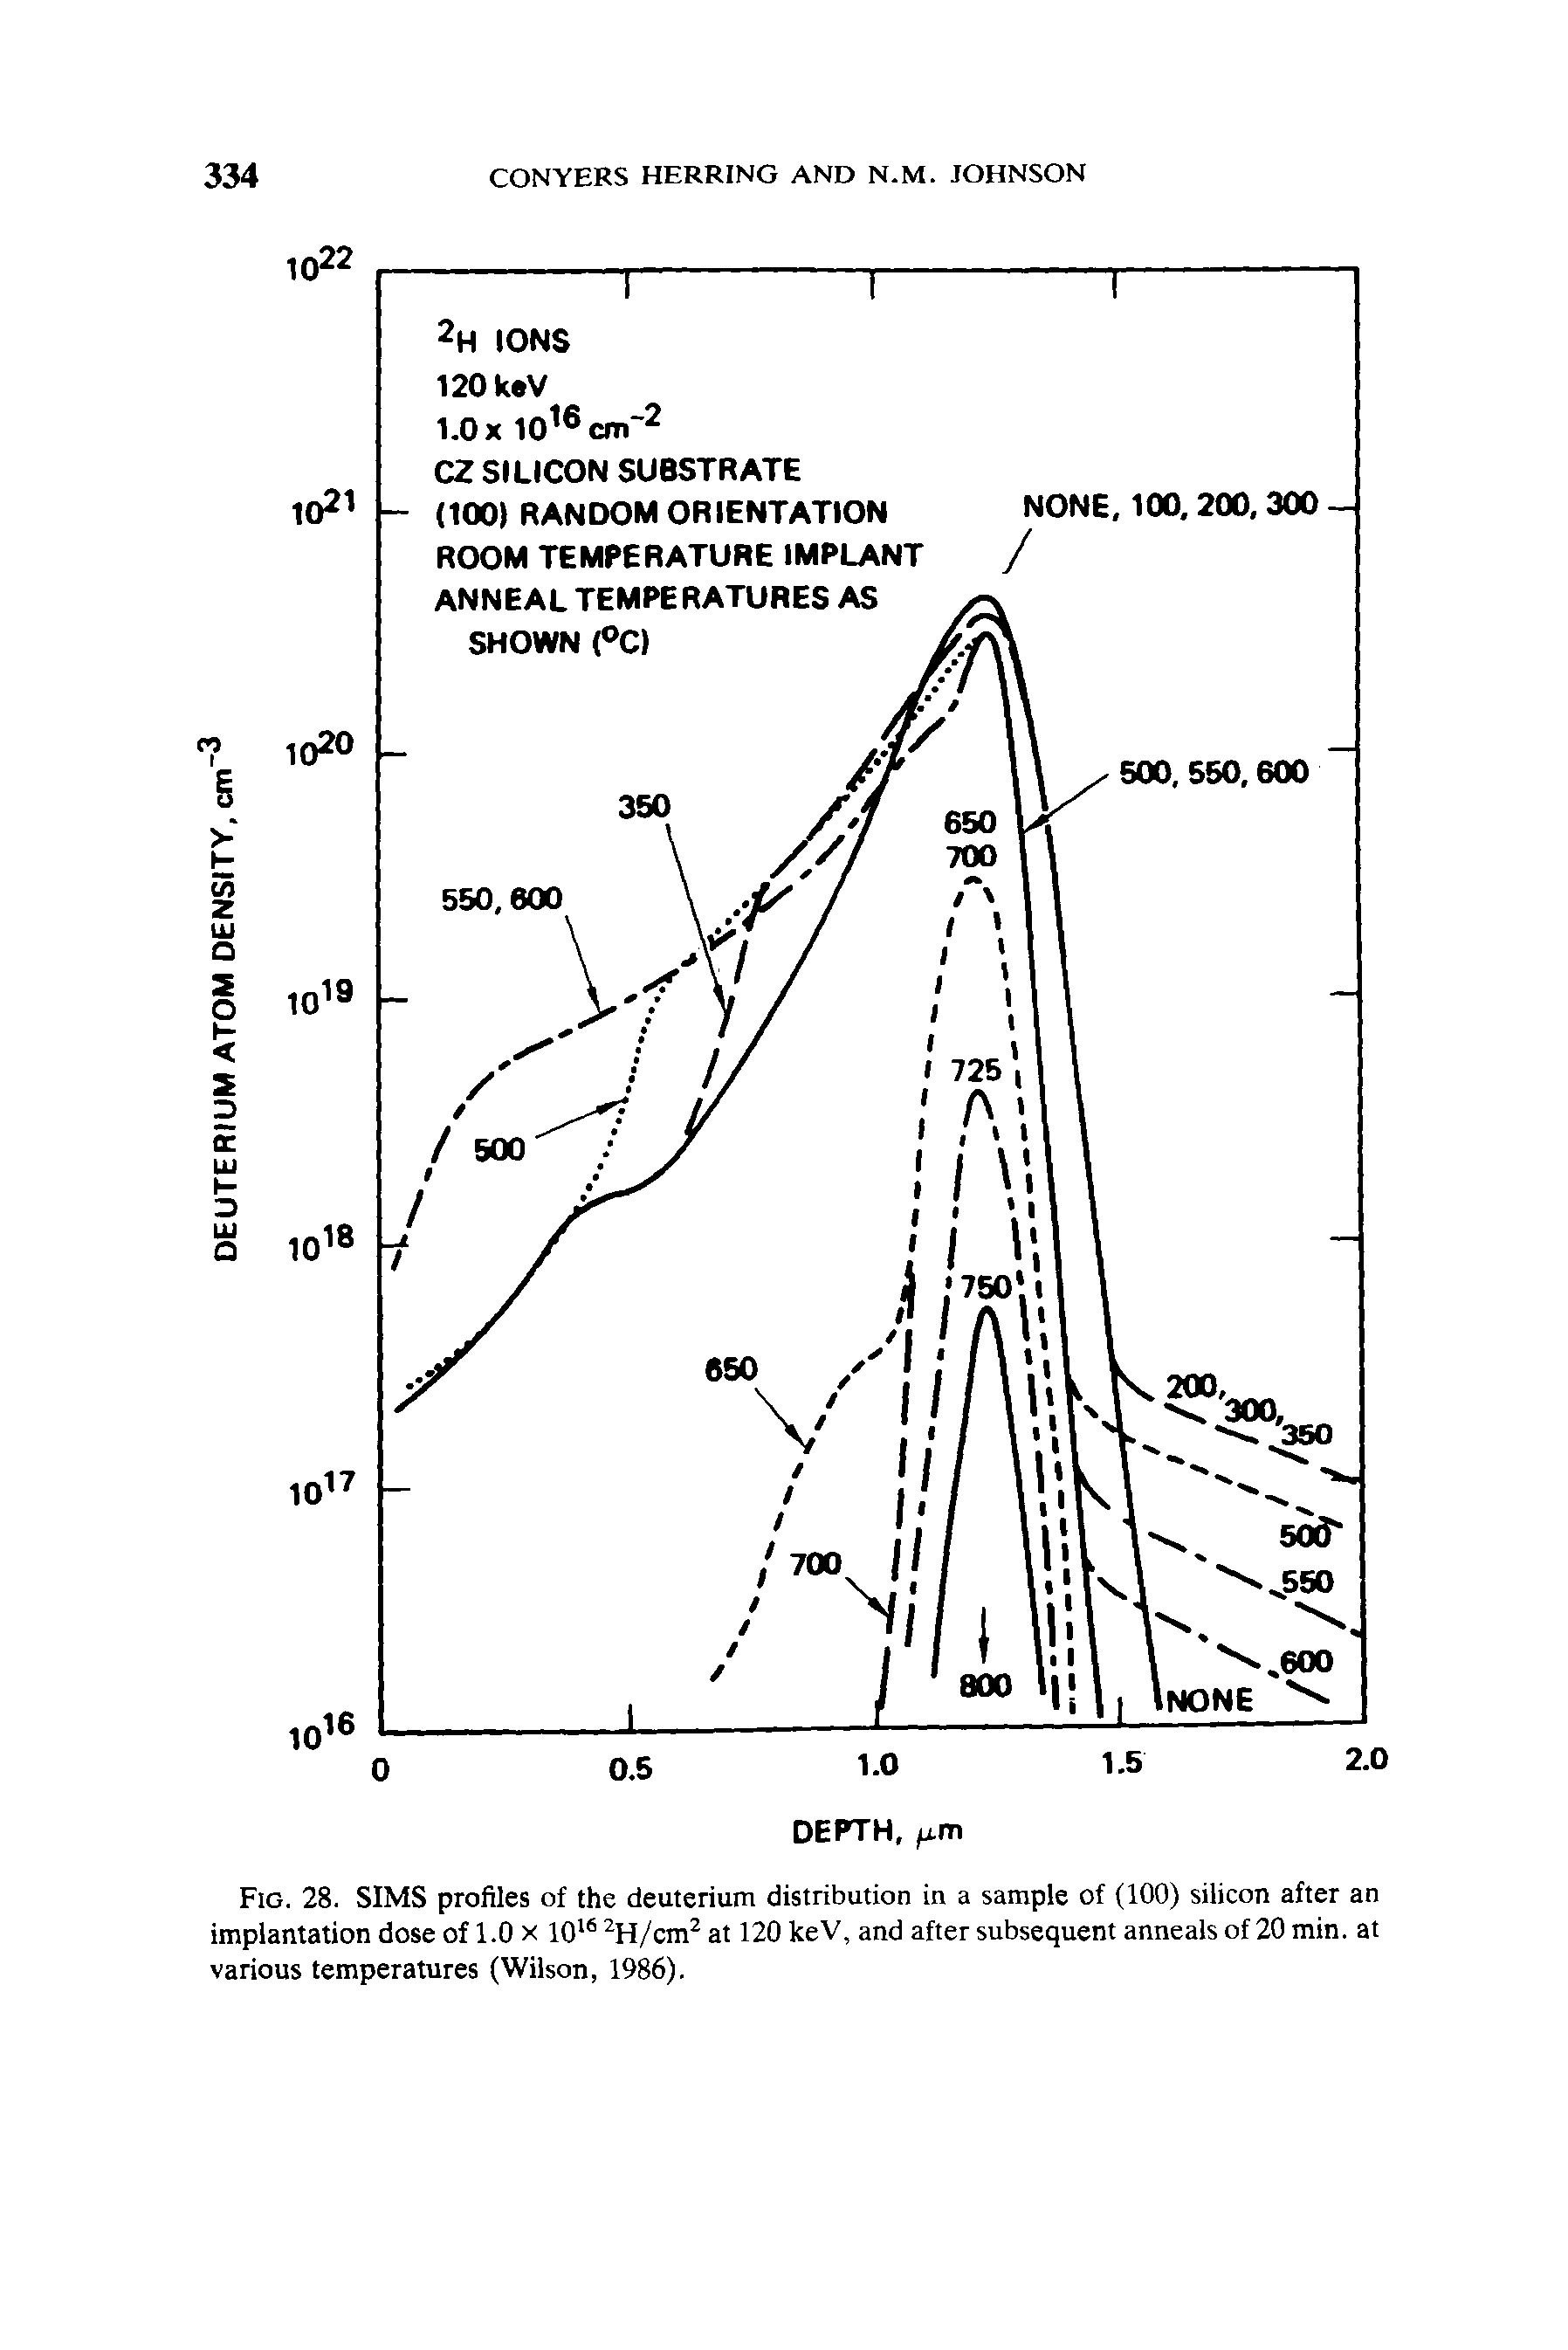 Fig. 28. SIMS profiles of the deuterium distribution in a sample of (100) silicon after an implantation dose of 1.0 x 1016 2H/cm2 at 120 keV, and after subsequent anneals of 20 min. at various temperatures (Wilson, 1986).